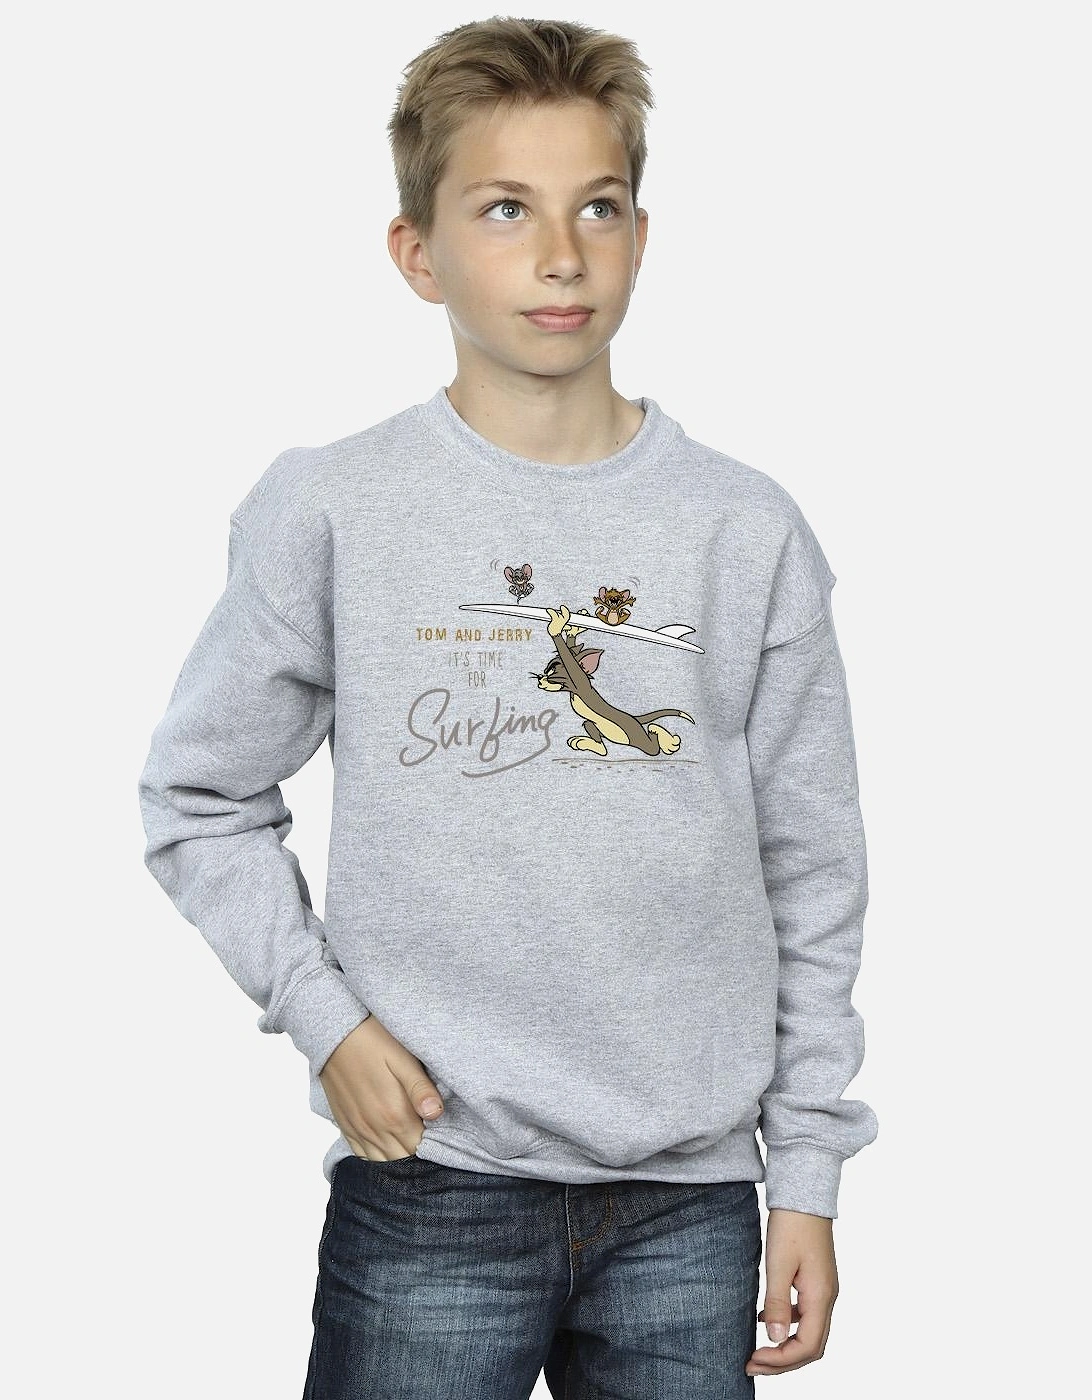 Tom And Jerry Boys It?'s Time For Surfing Sweatshirt